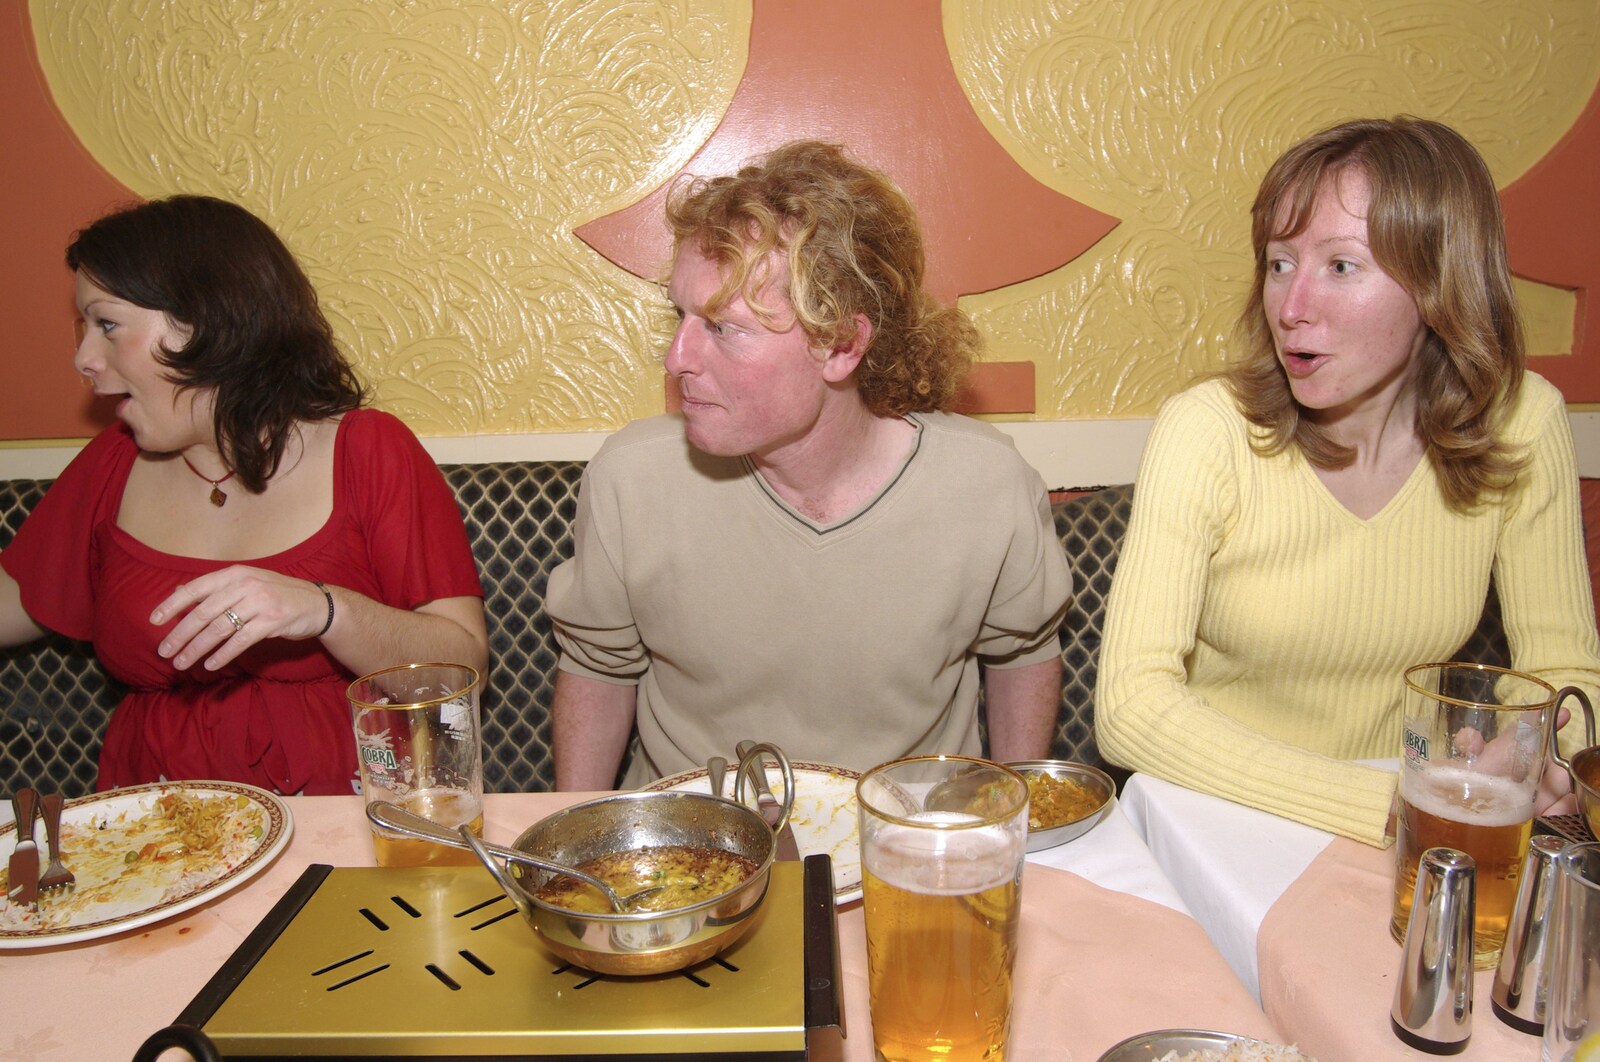 Clare, Wavy and Martina in Diss Tandoori from Organ Practice, Swiss Fondue and Curry With Gov, Thorndon, Cambridge and Diss - 27th January 2008